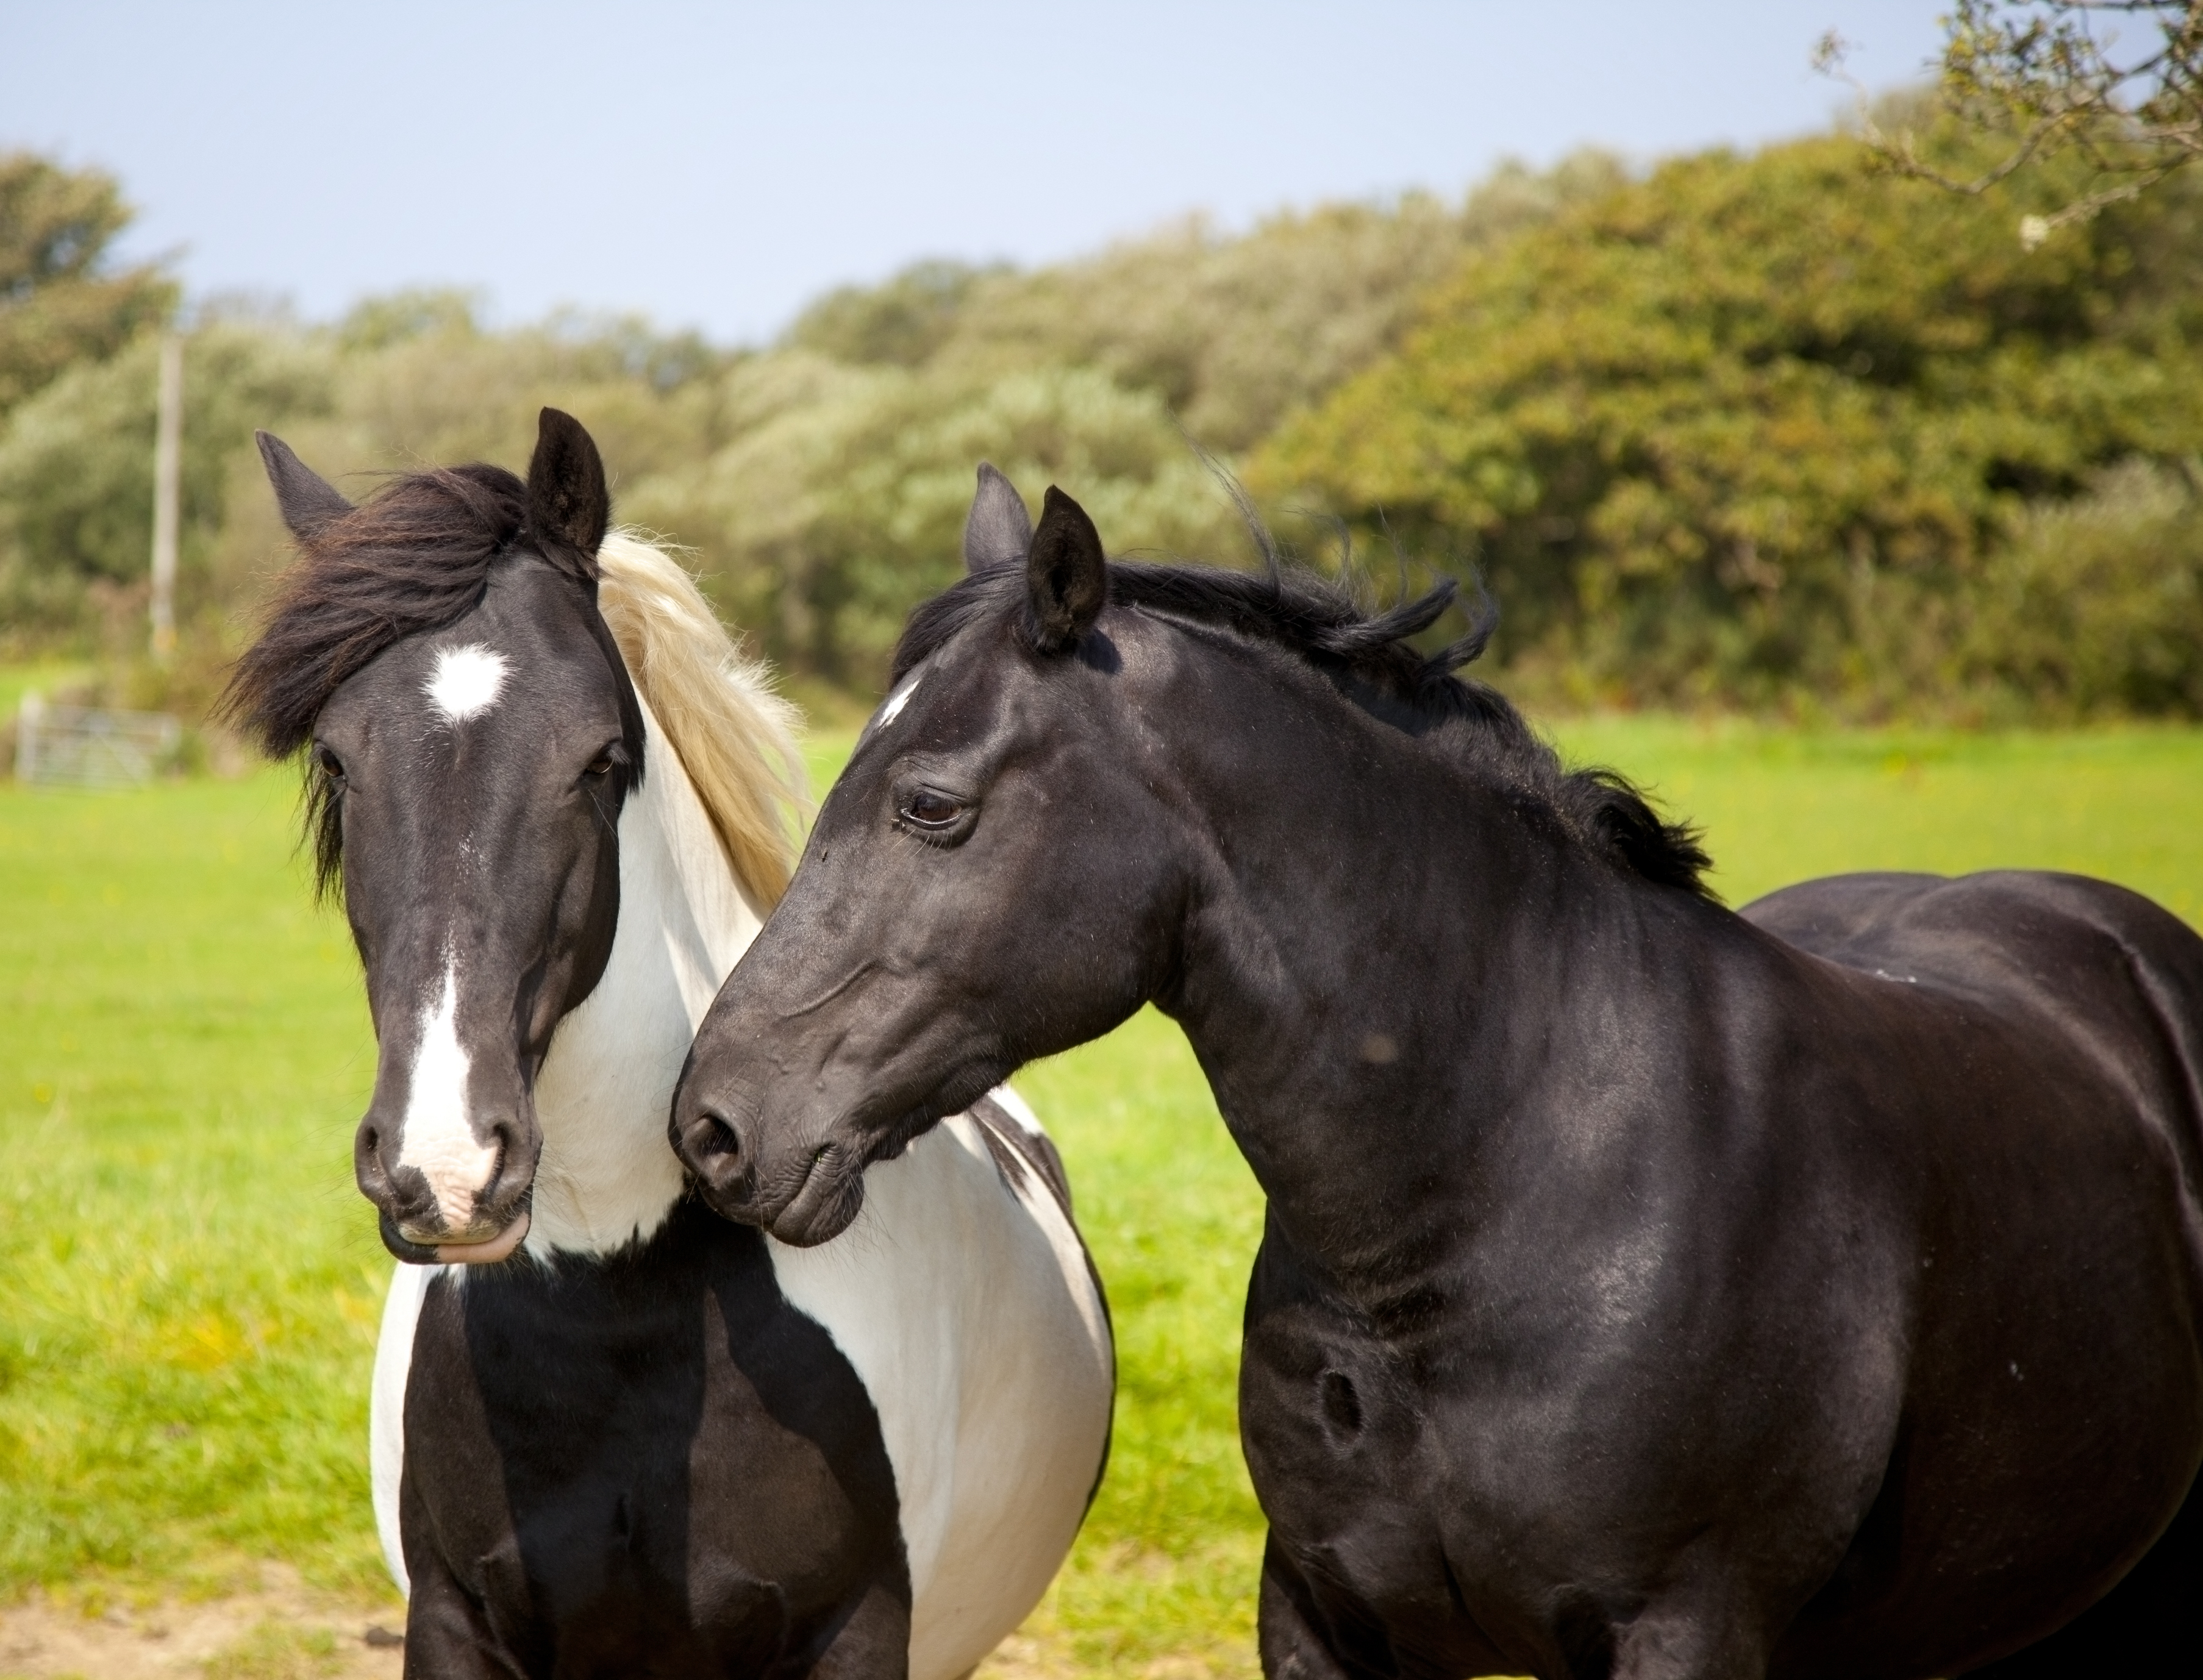 two horses in a close relationship - mother and son - showing closeness